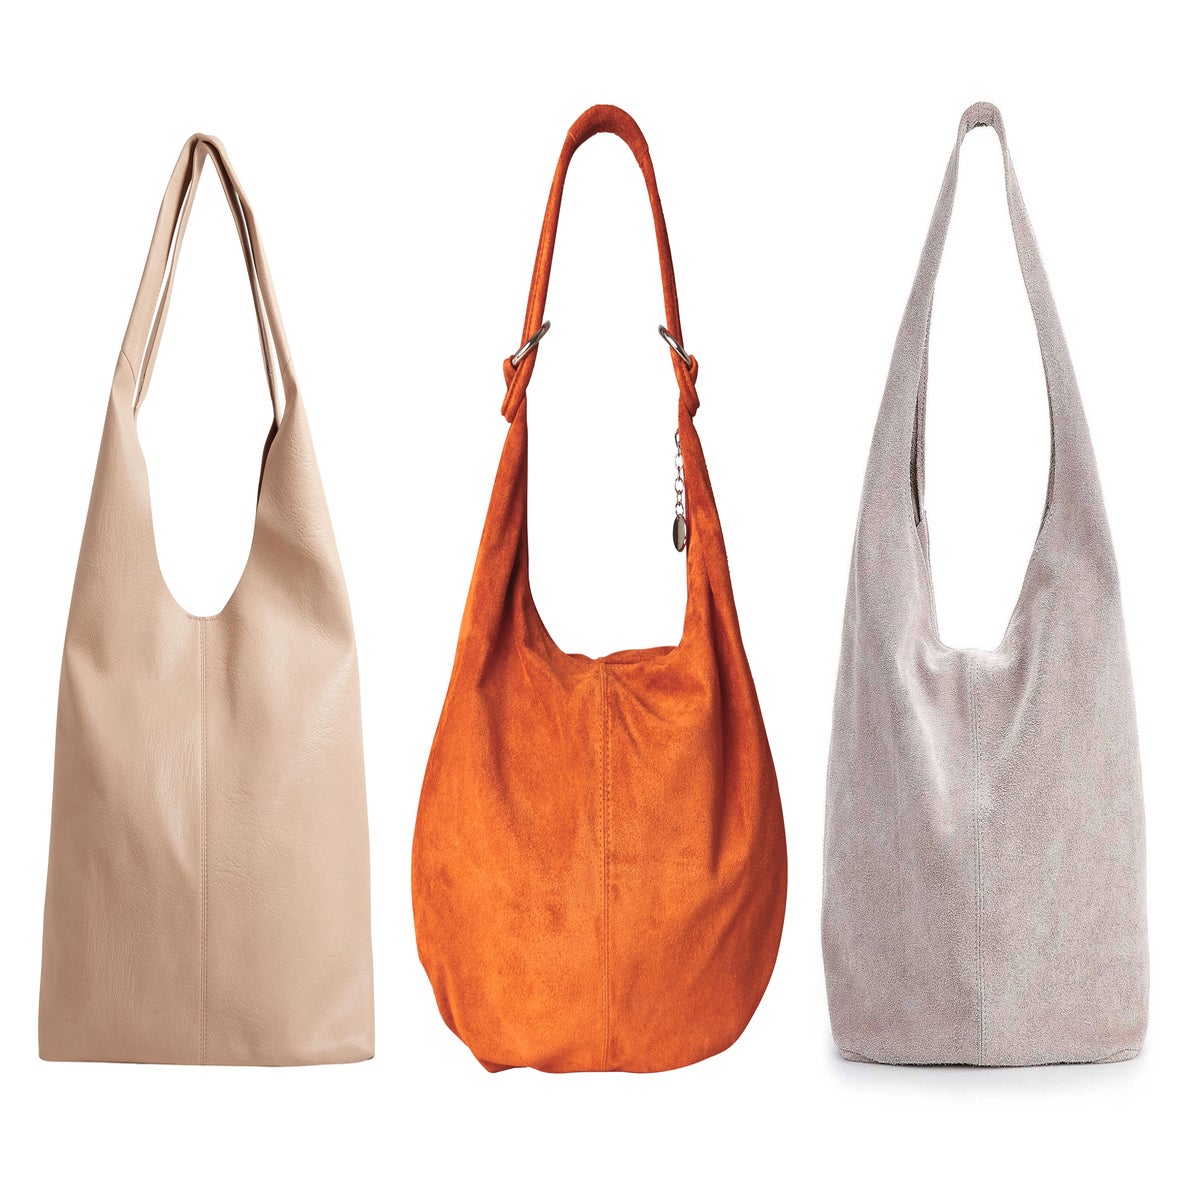 Hobo bags are back: 5 of the season's most stylish totes